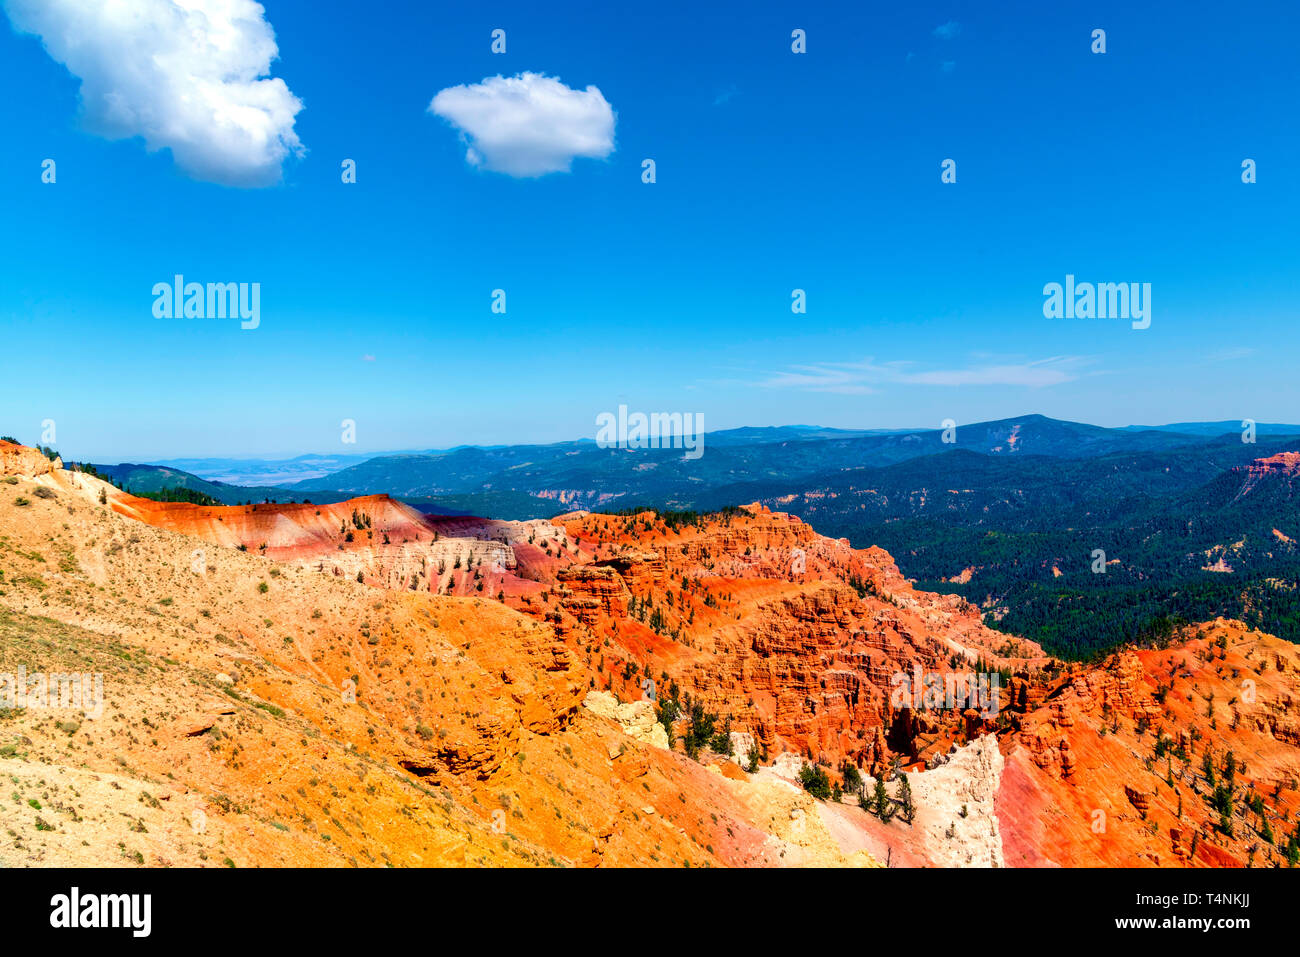 Yellow dirt makes way for orange and reddish rock formations in canyon with green mountains beyond under a bright blue sky. Stock Photo